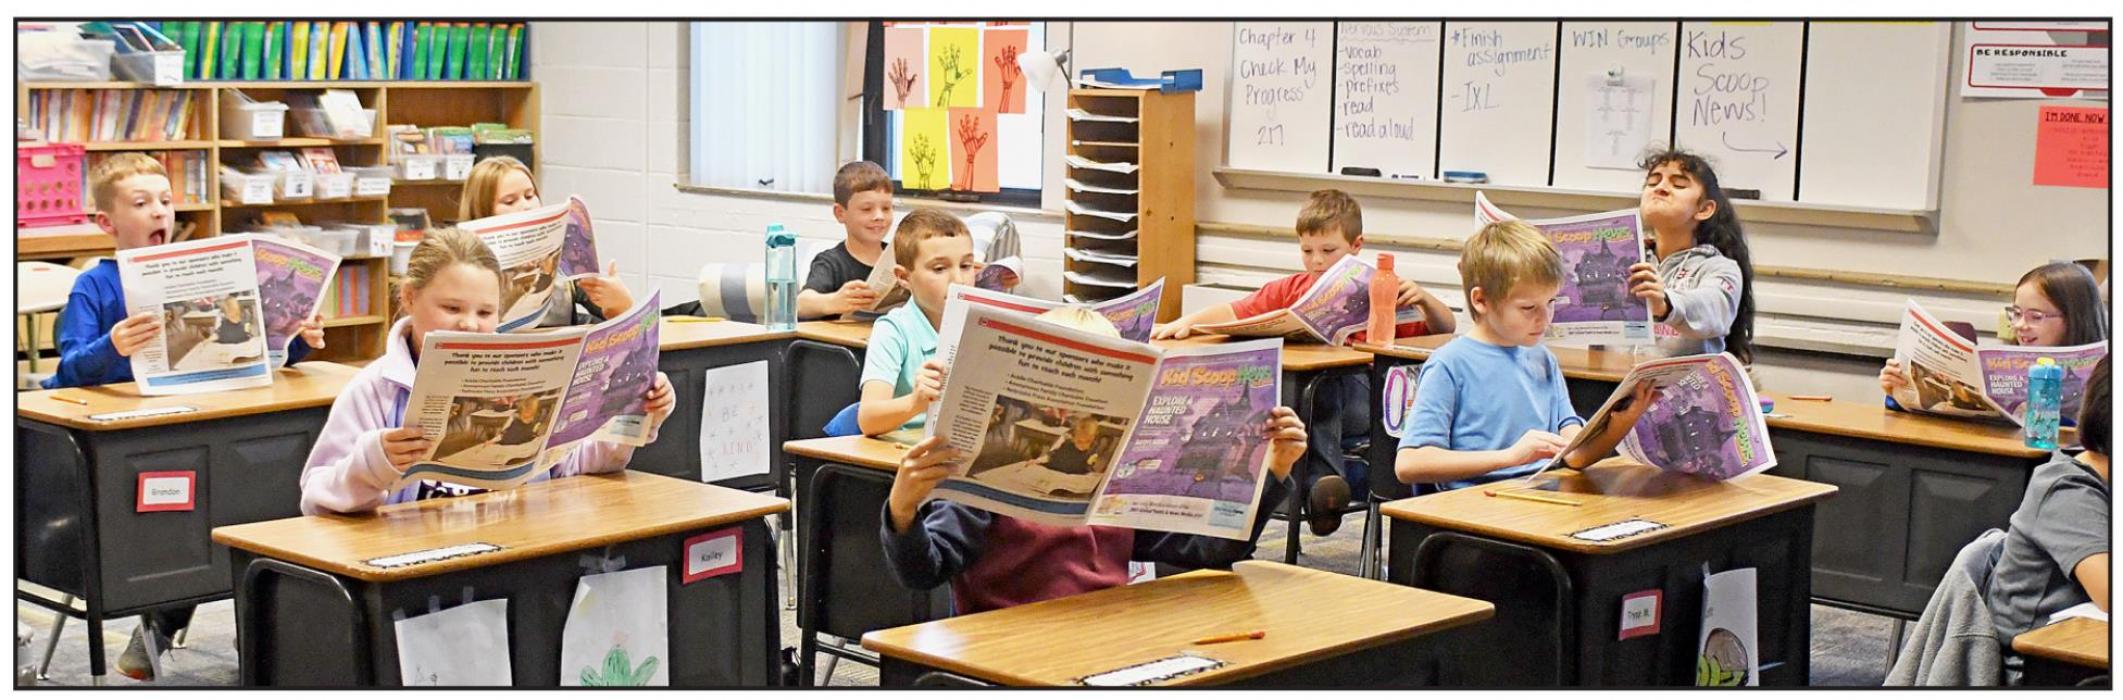 Third through fifth graders at Ainsworth Community Schools are receiving kid-friendly print newspapers called Kid Scoop News delivered each month of the school year by the Ainsworth Star-Journal in partnership with the Nebraska Press Association Foundation. Above, Mrs. Fairhead’s third grade class enjoys reading their own personal newspapers.